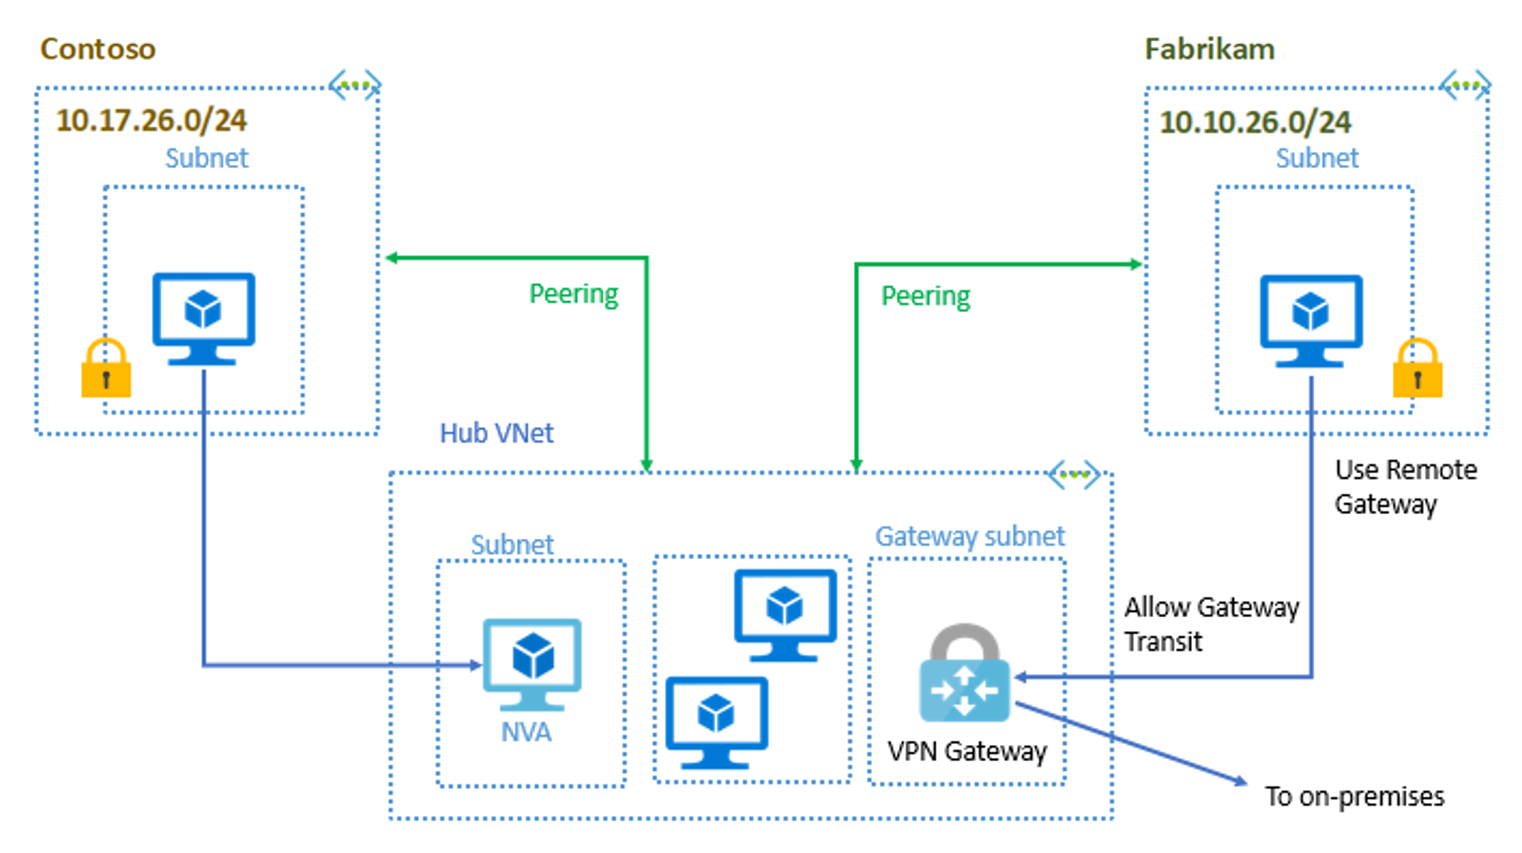 Hub-and-spoke configuration - Contoso and Fabrikam peer to Hub VNet. Hub VNet contains NVA, VMs, and a VPN Gateway connected to on-premises network.